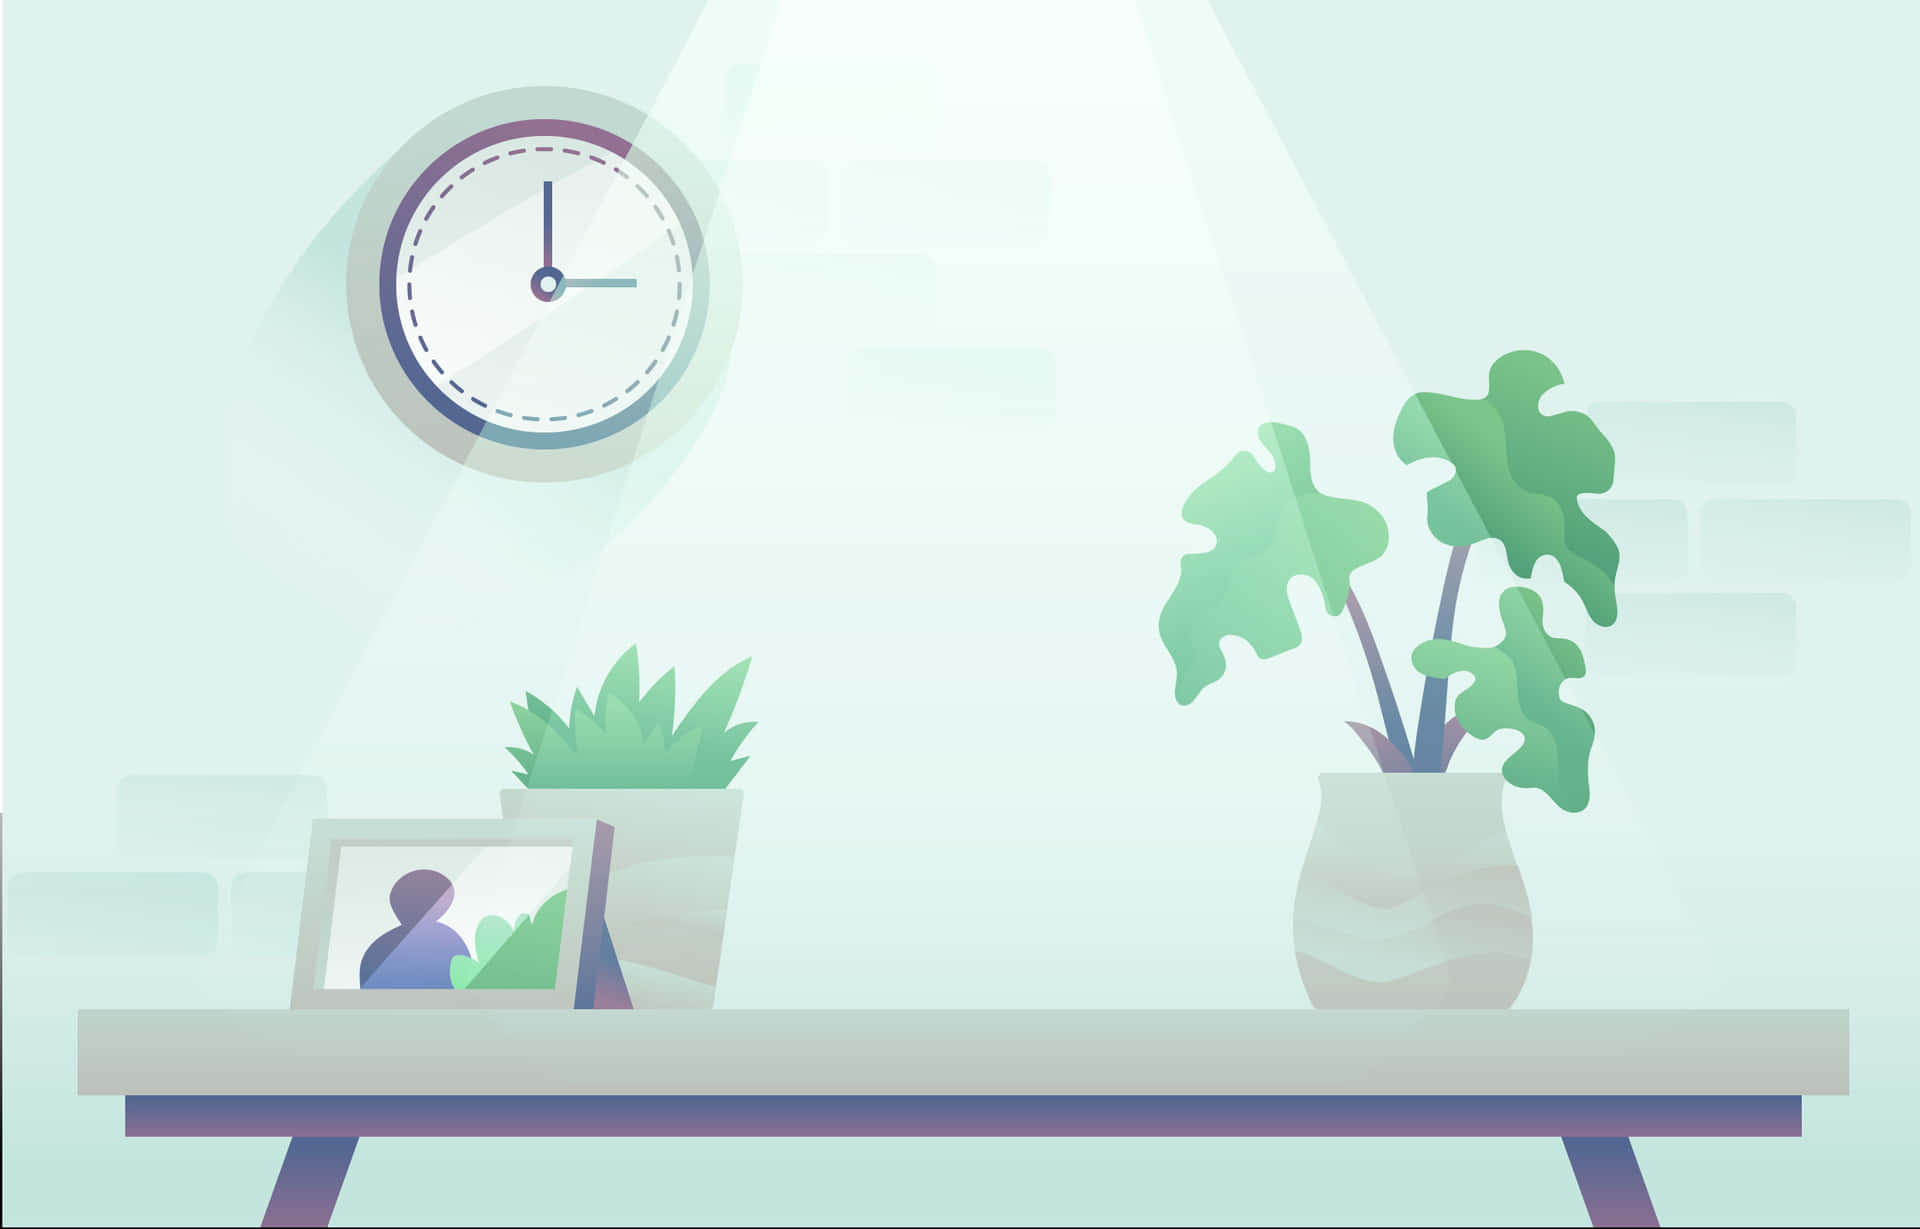 A Clock On A Table With A Plant On It